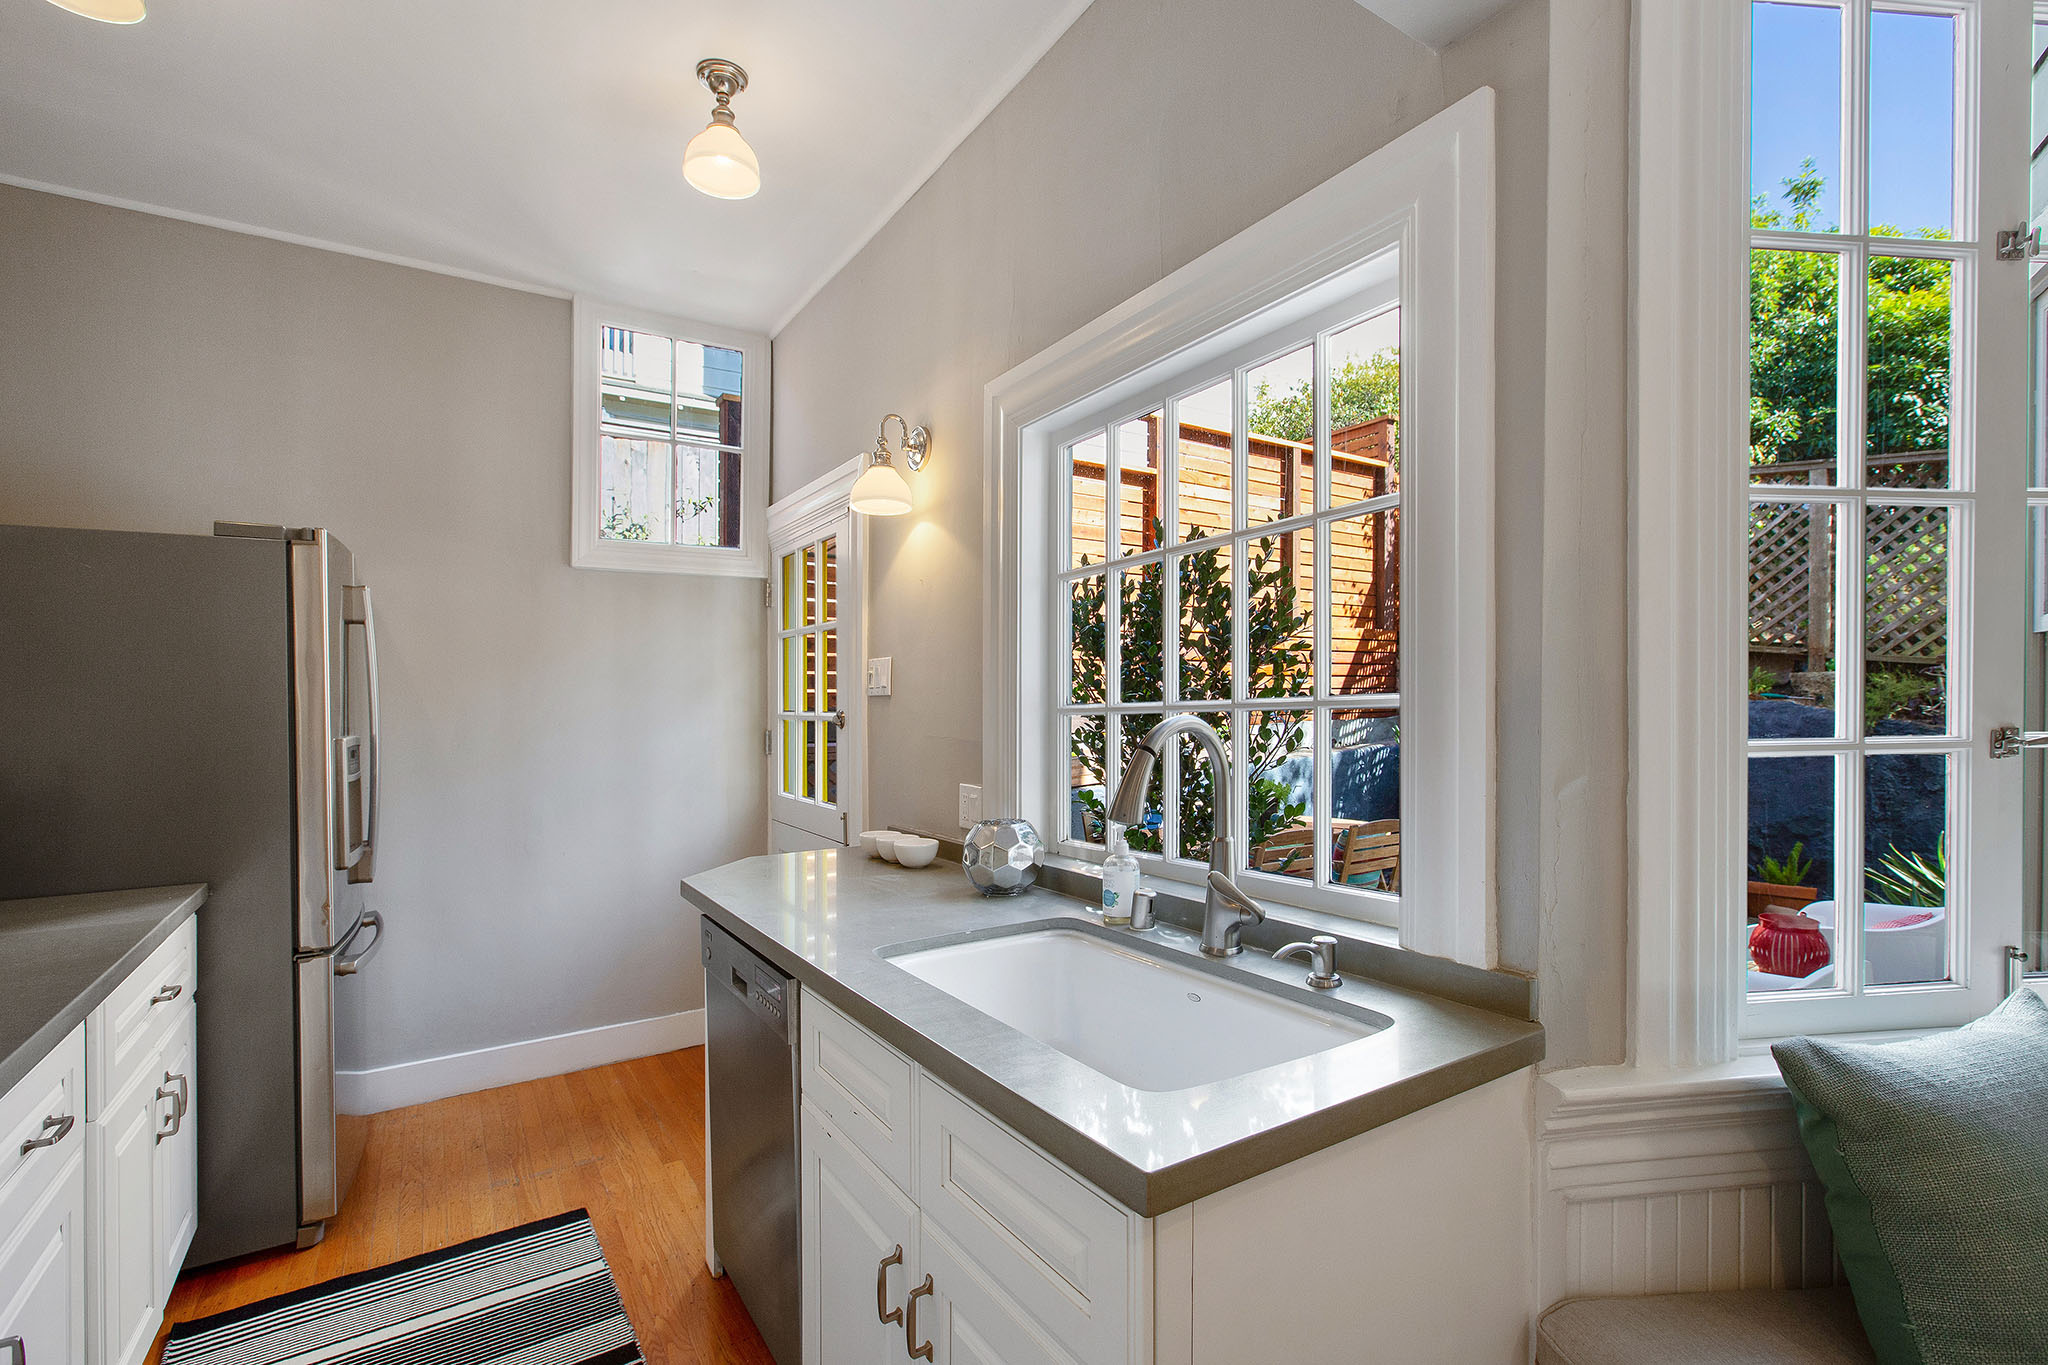 Property Photo: Kitchen, featuring large windows and sink area